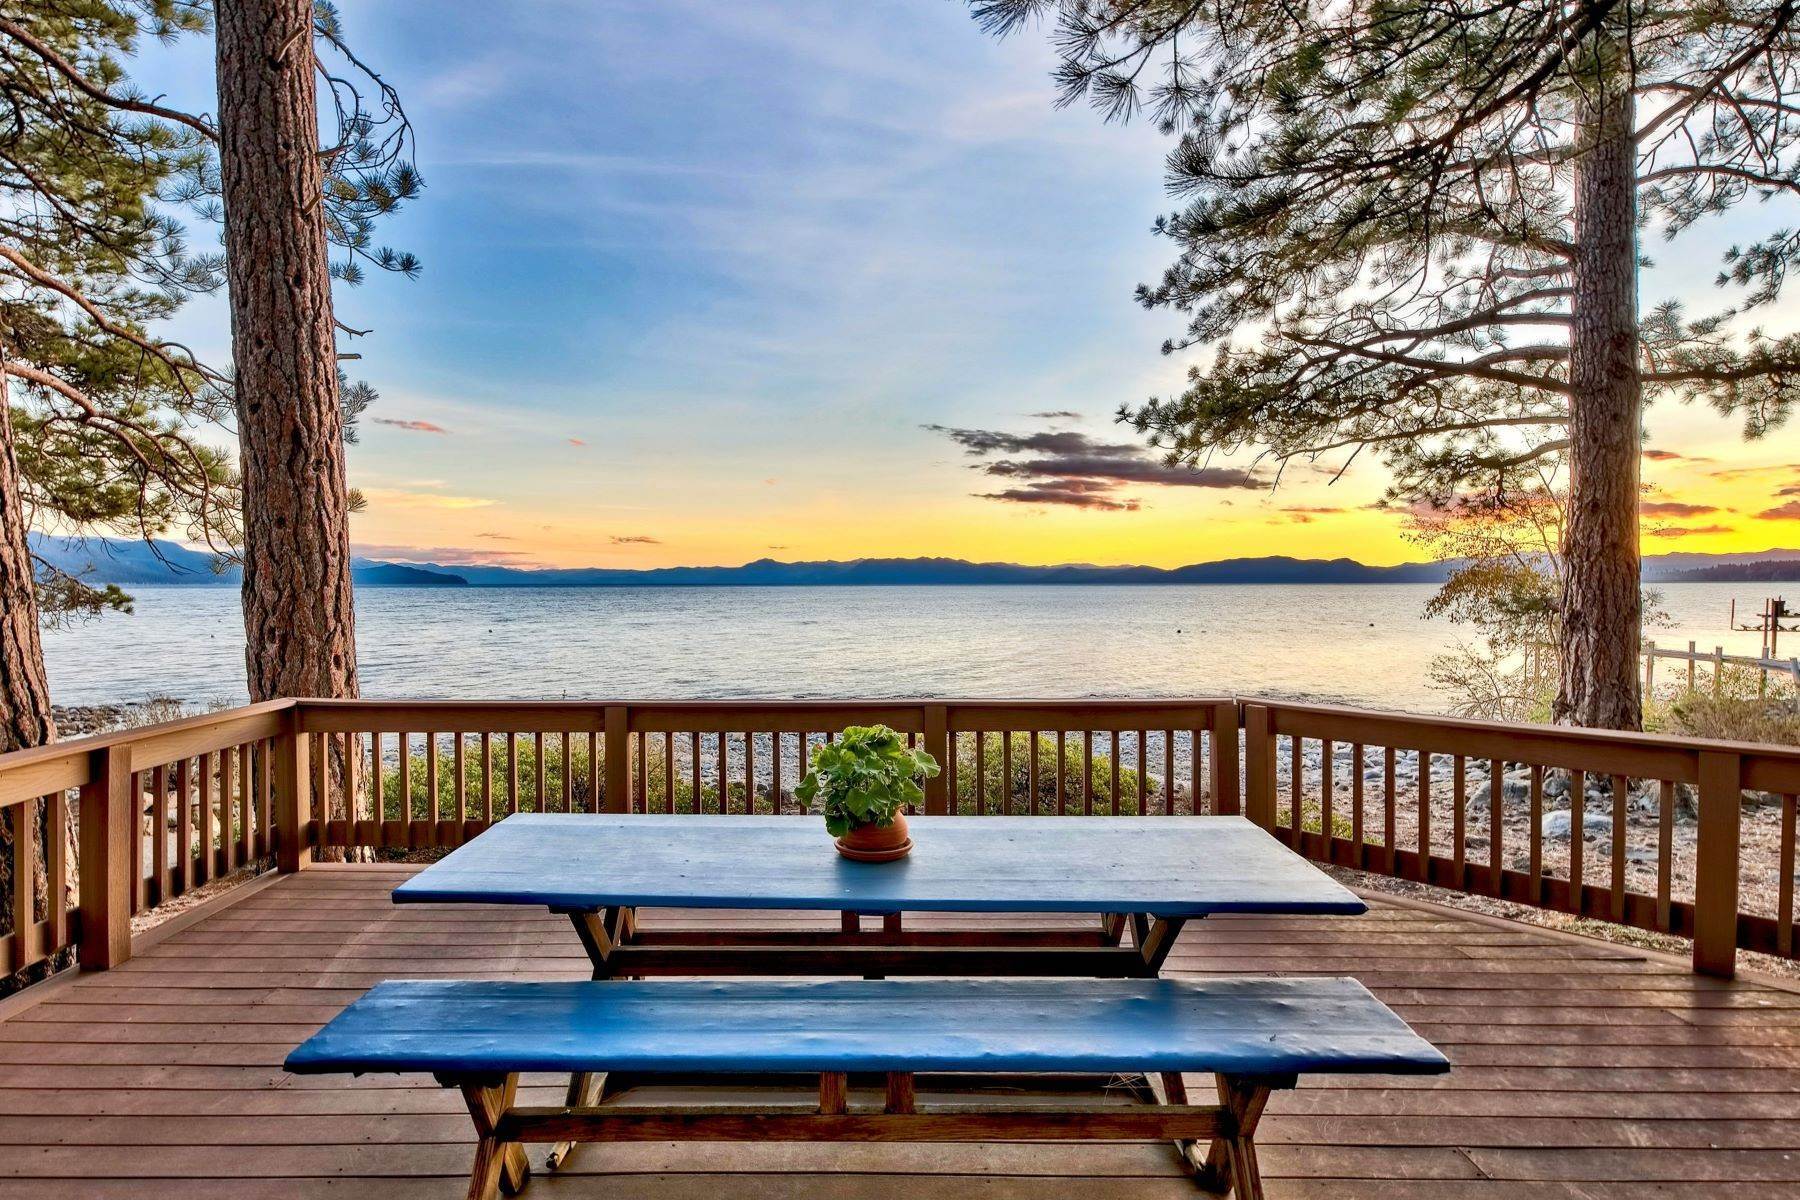 Single Family Homes for Sale at Unique Lakefront Opportunity 893 Lakeshore Blvd Incline Village, Nevada 89451 United States